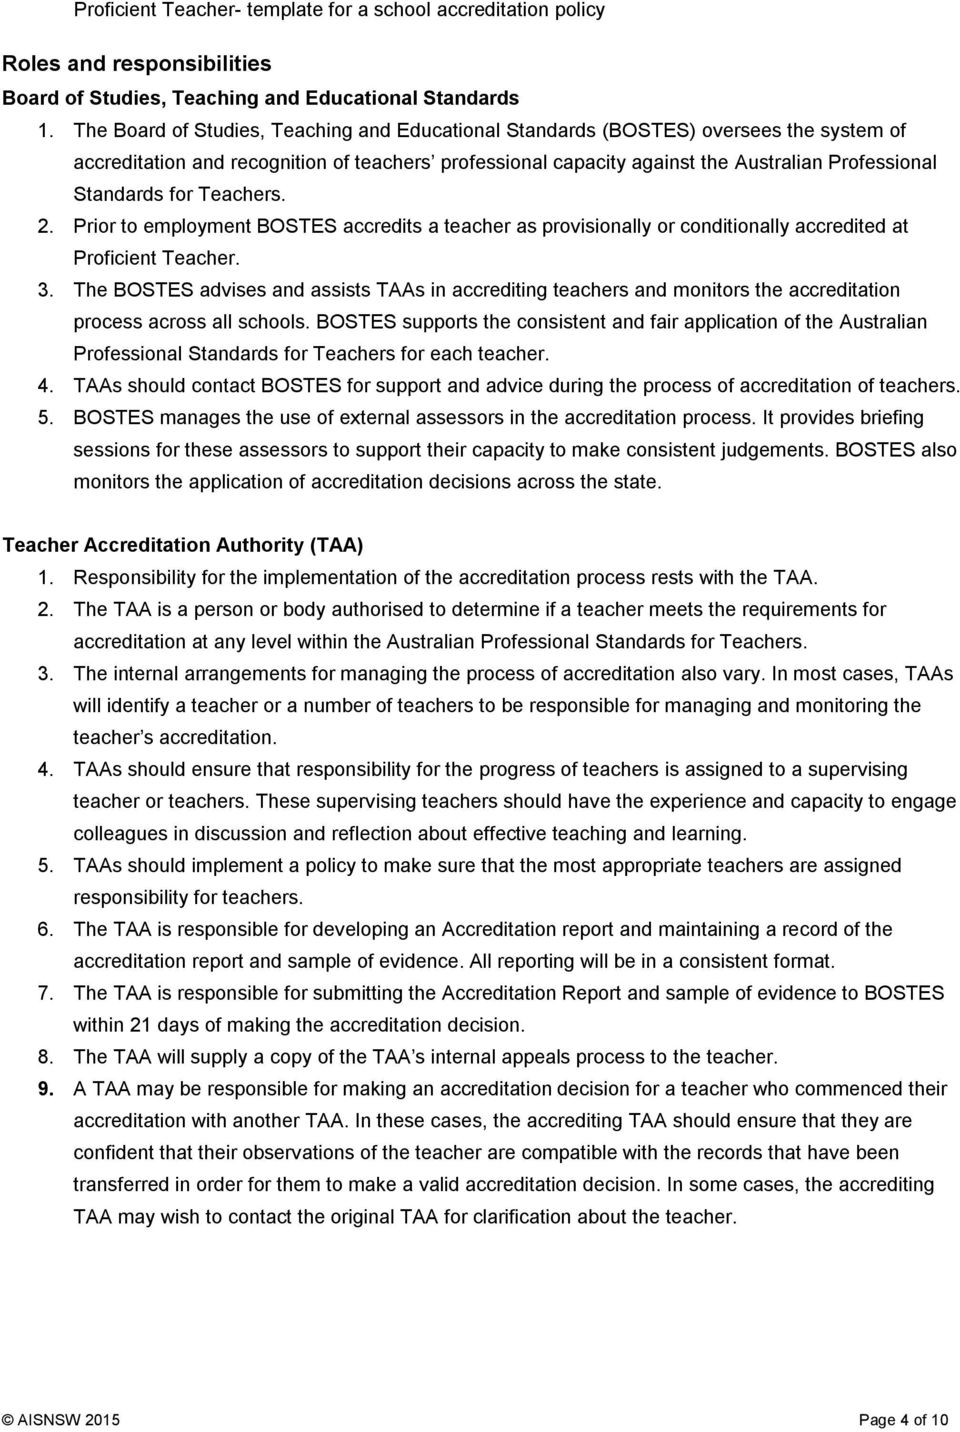 for Teachers. 2. Prior to employment BOSTES accredits a teacher as provisionally or conditionally accredited at Proficient Teacher. 3.